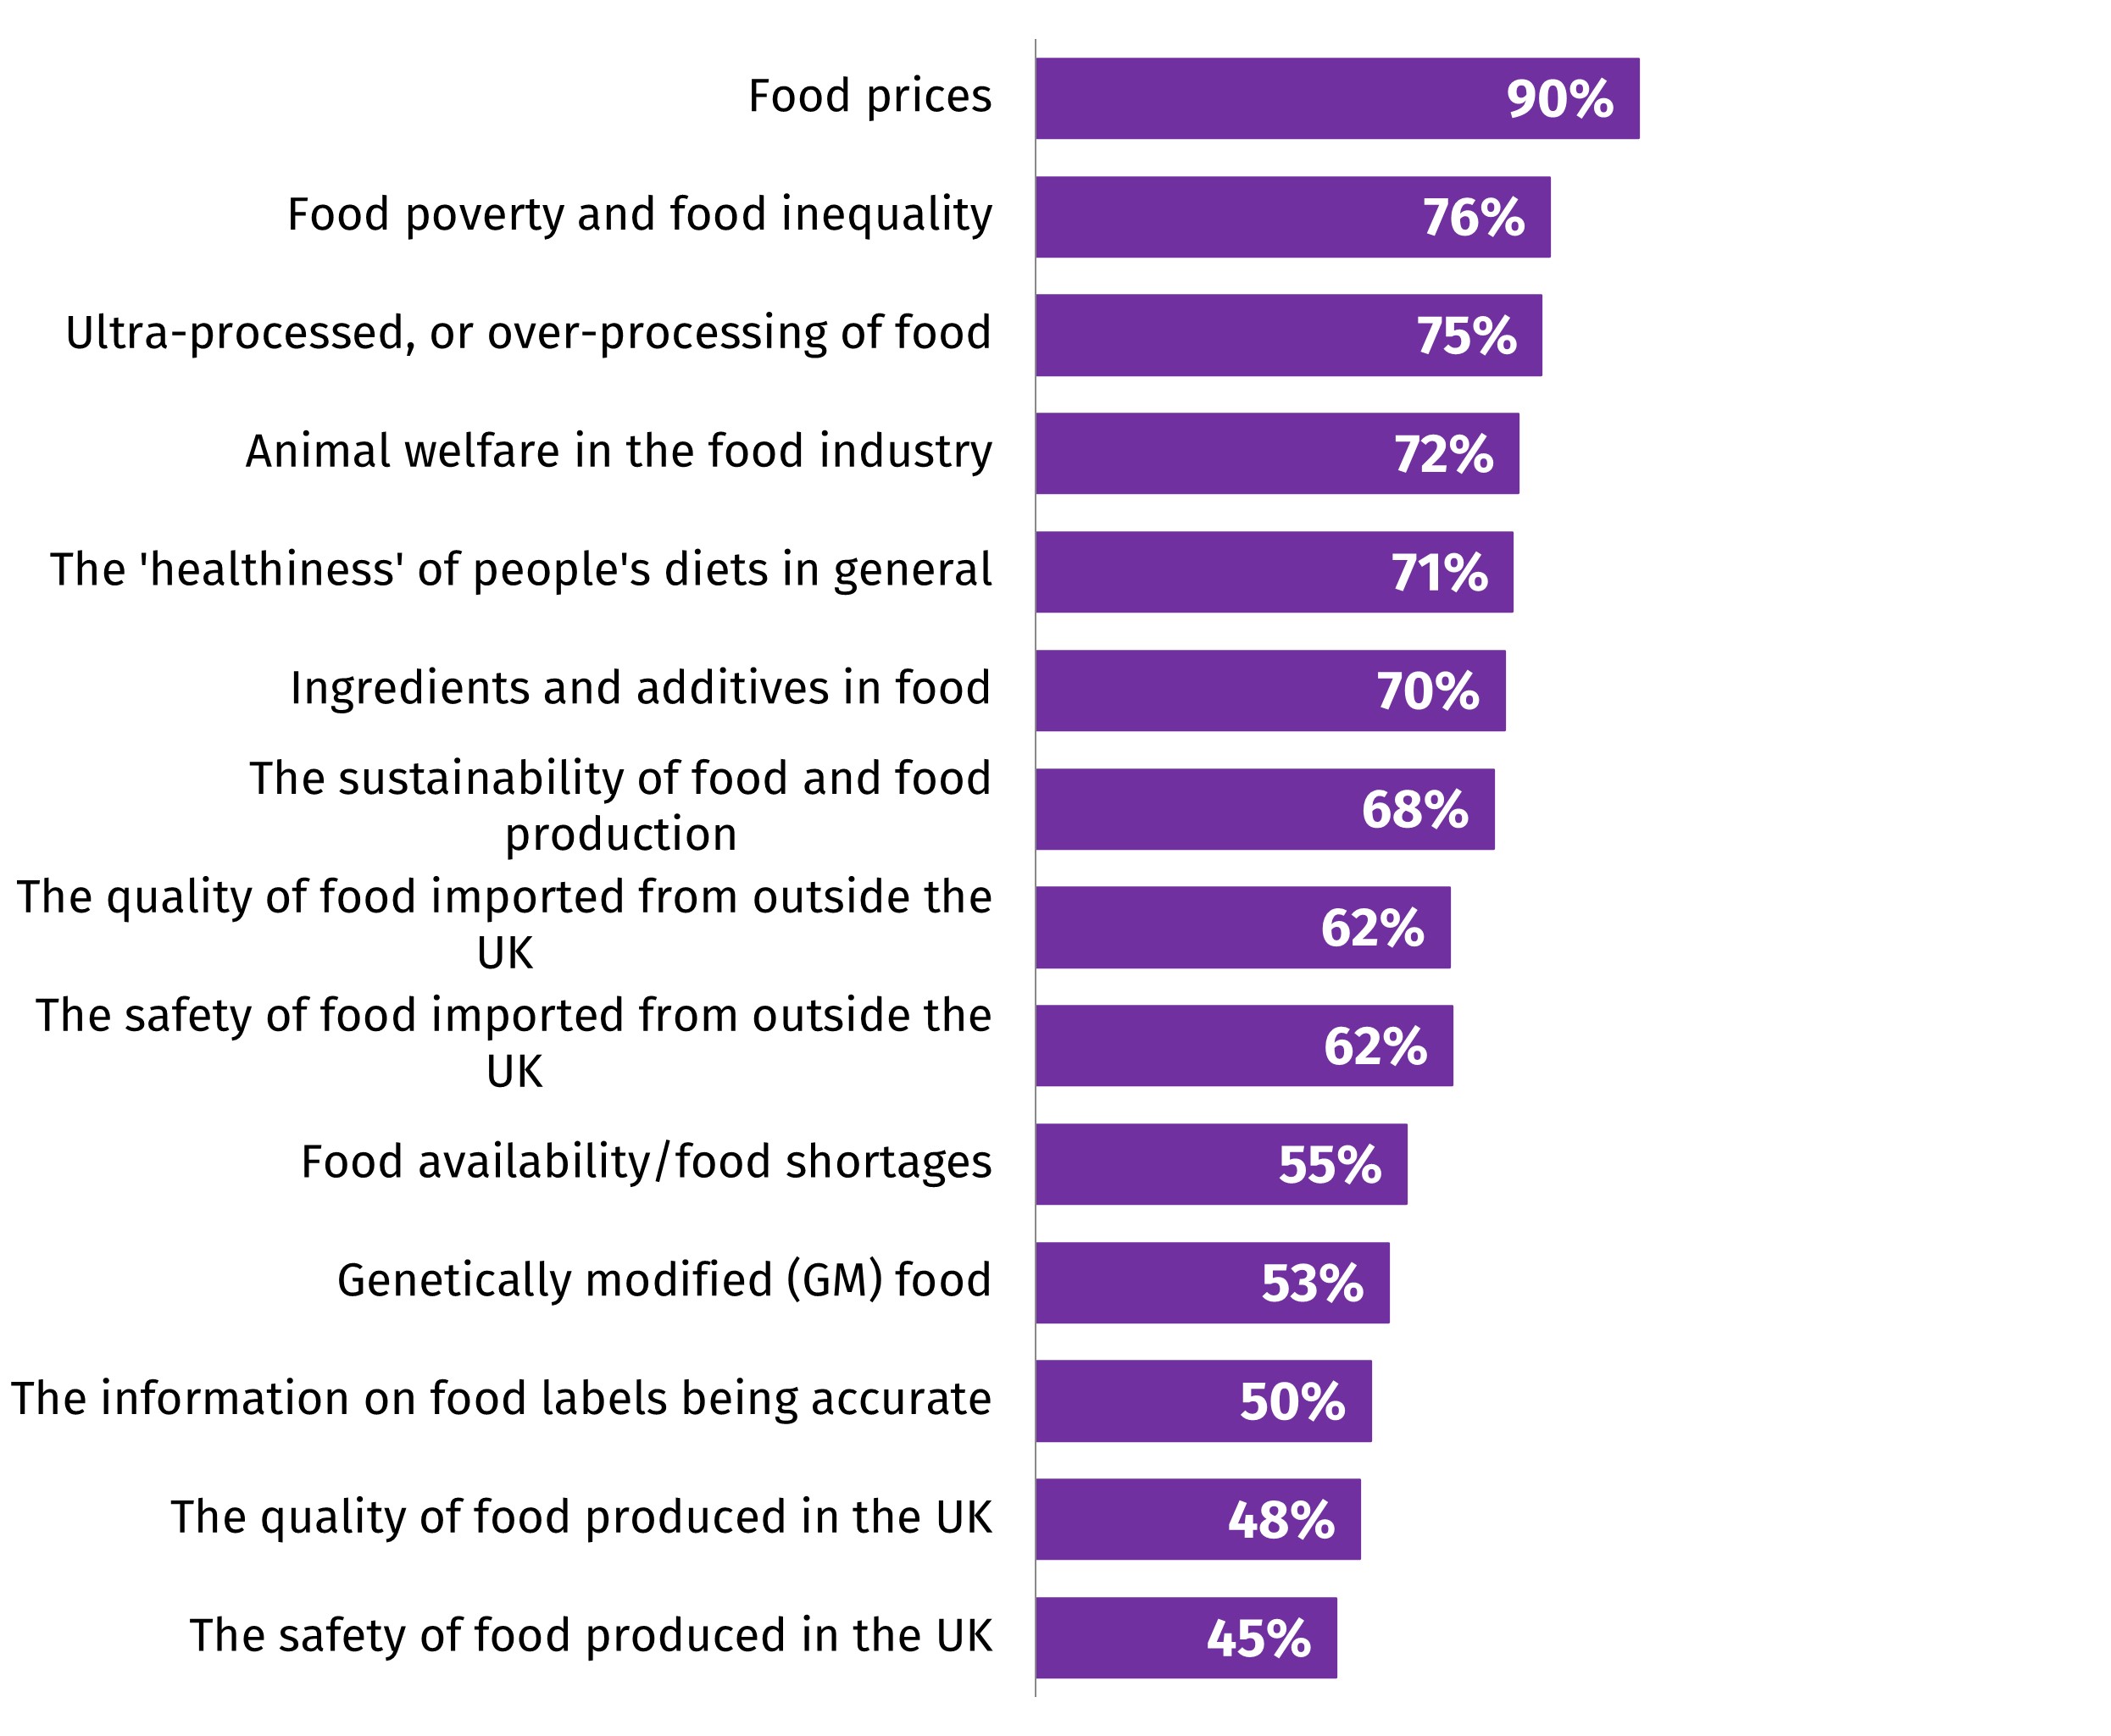 90% food prices compared to 92% in August. 76% food poverty and inequality compared to 78% in August. 